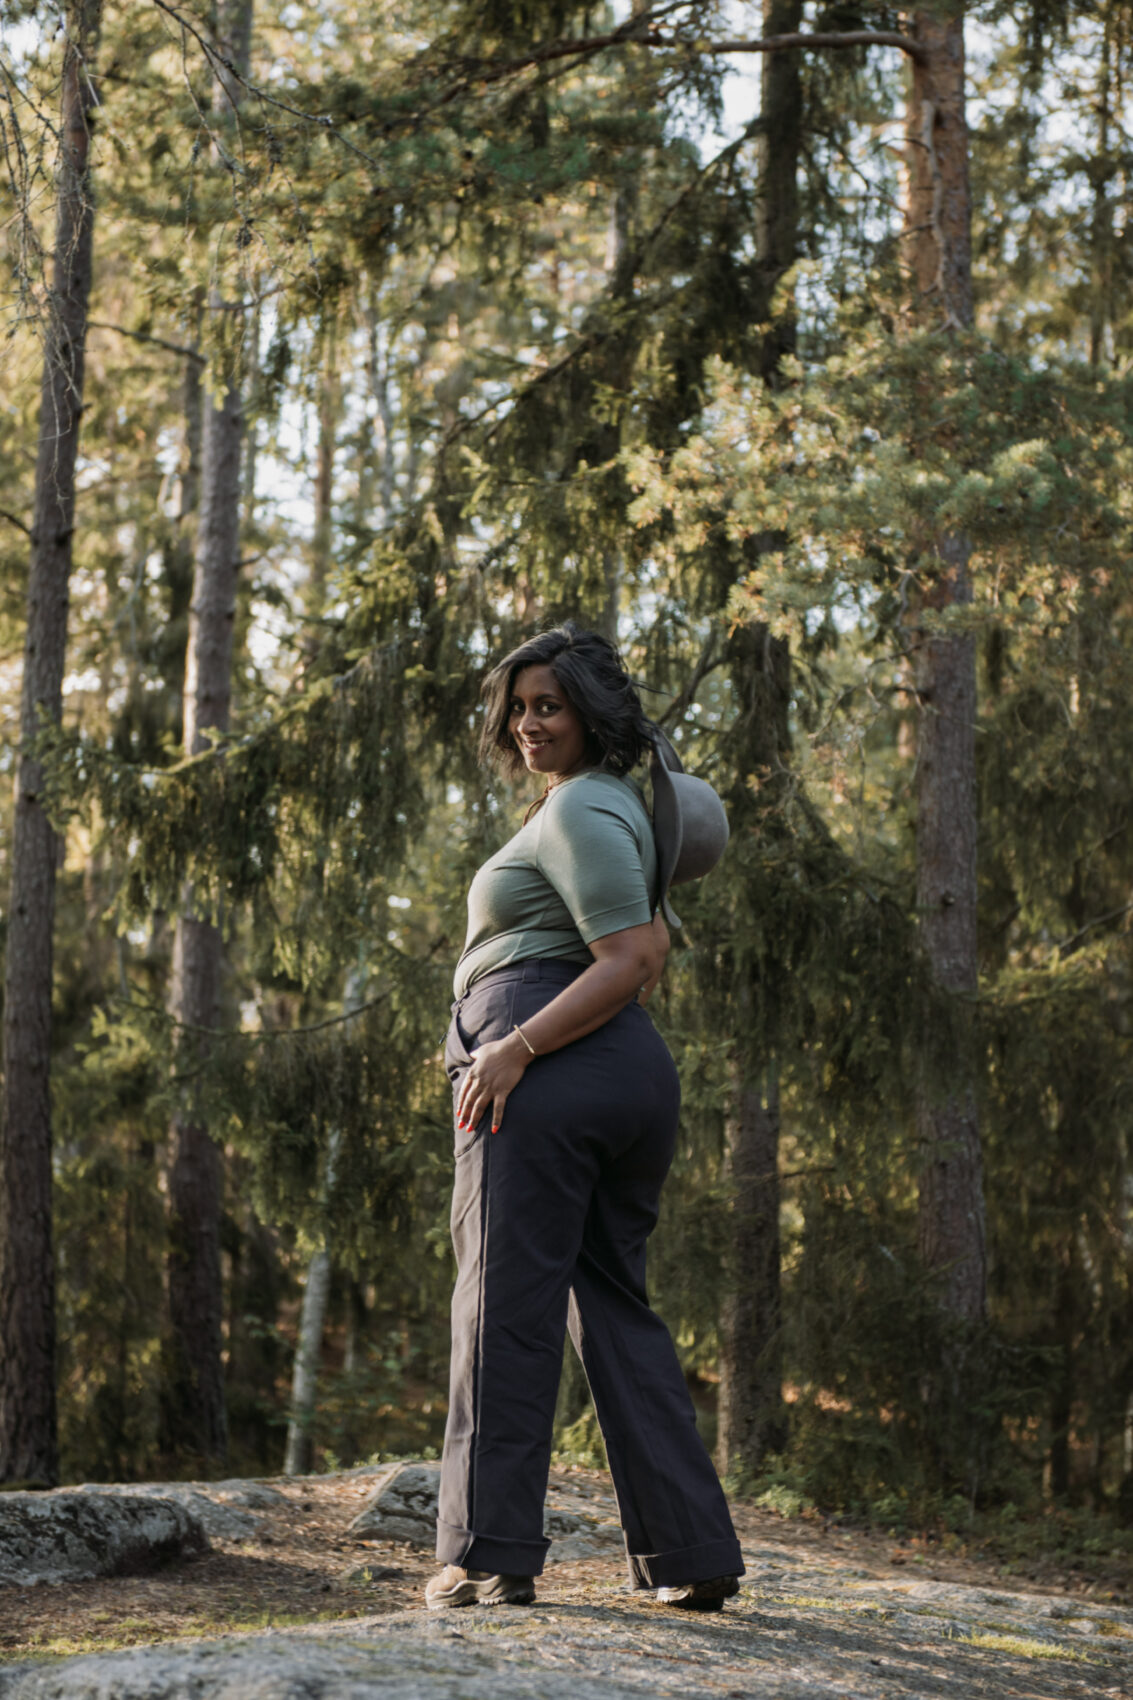 Inclusivity Outdoors - The Best Plus Size Active & Walking Clothing